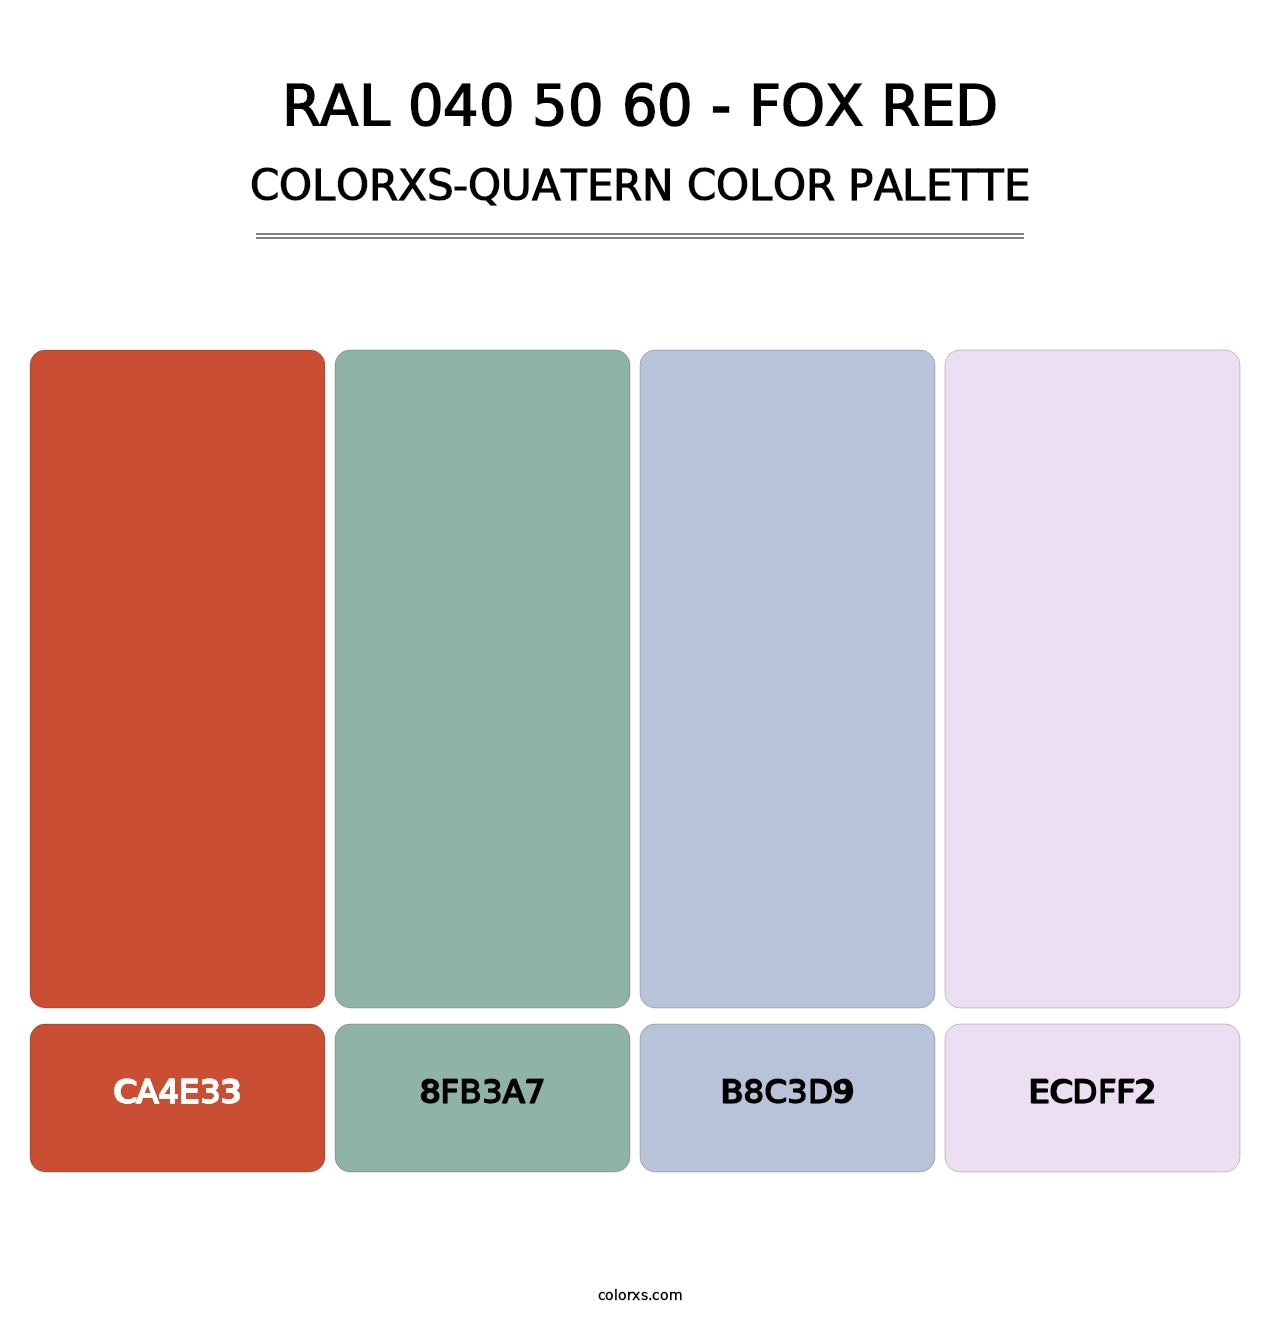 RAL 040 50 60 - Fox Red - Colorxs Quatern Palette